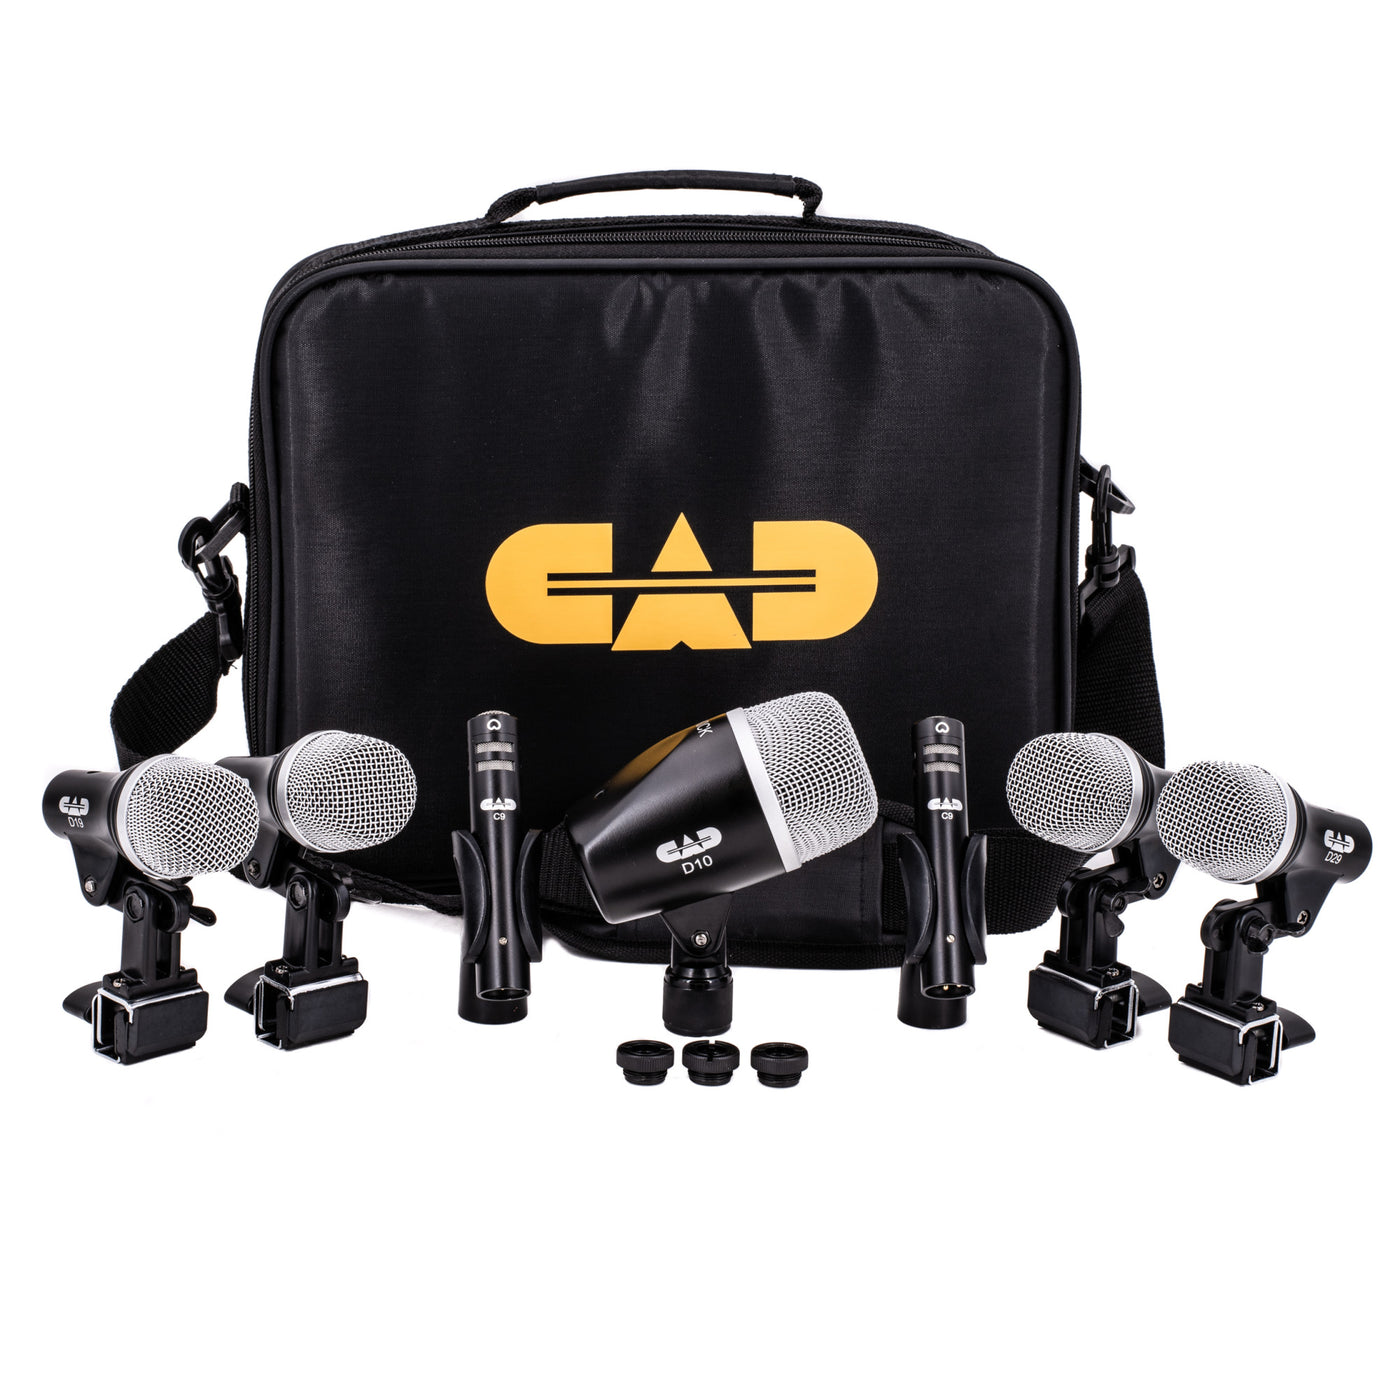 CAD Audio STAGE7 7-piece Drum Microphone Pack (STAGE7)